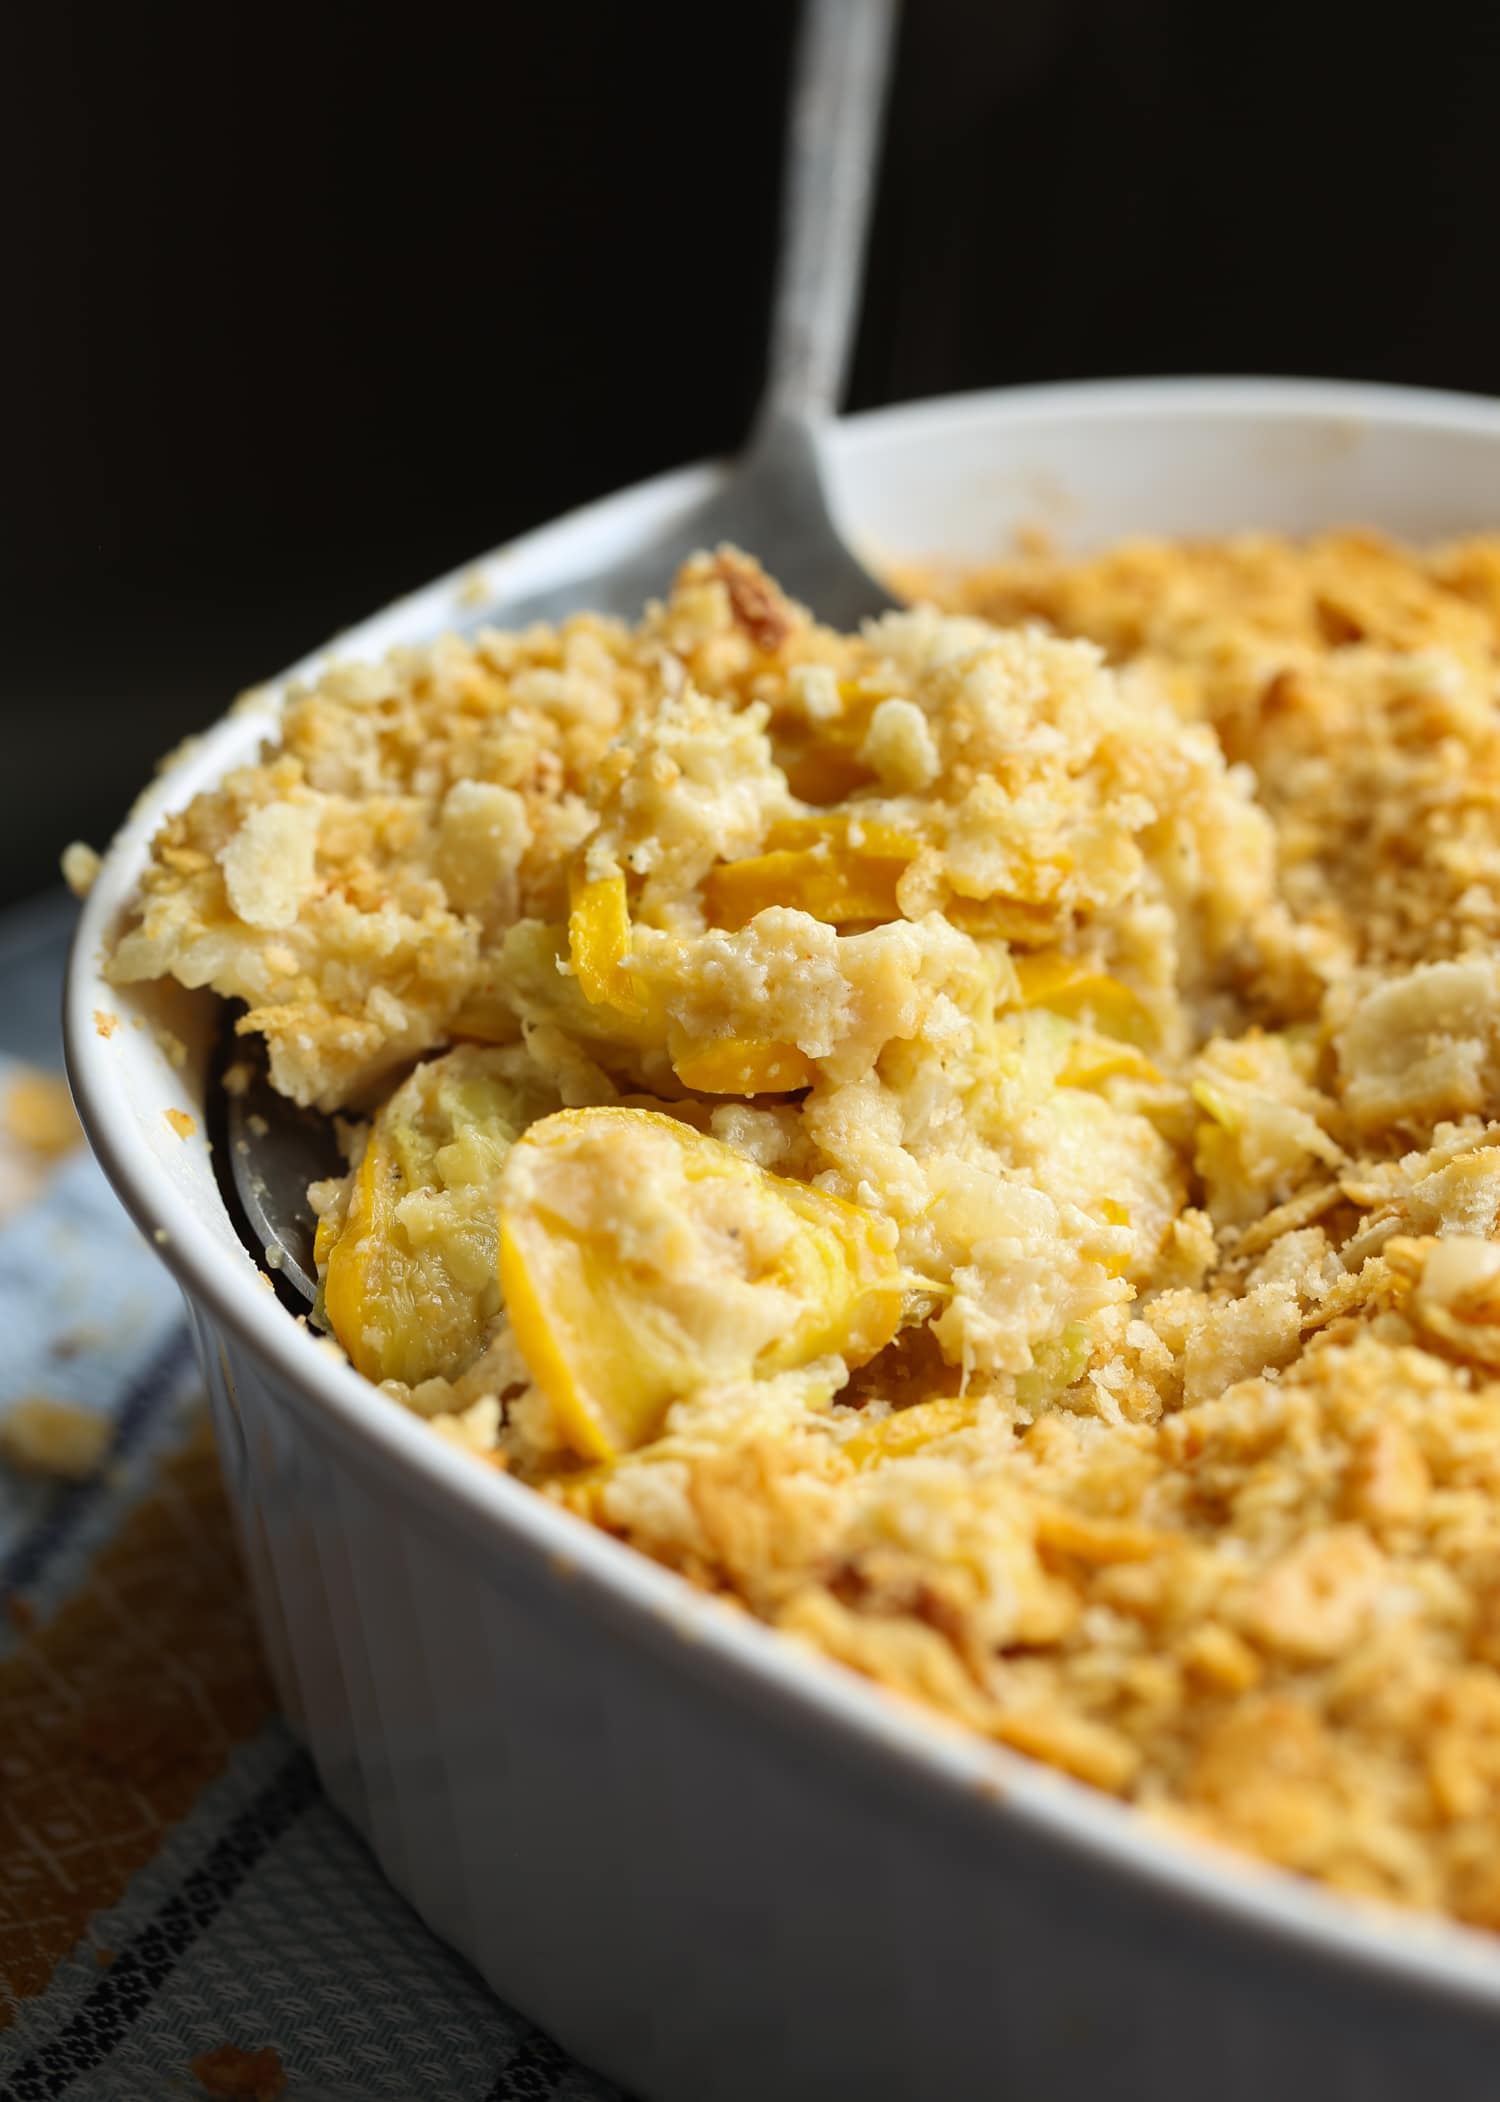 Ceamy squash casserole topped with crushed Ritz crackers in a baking dish with a serving spoon.